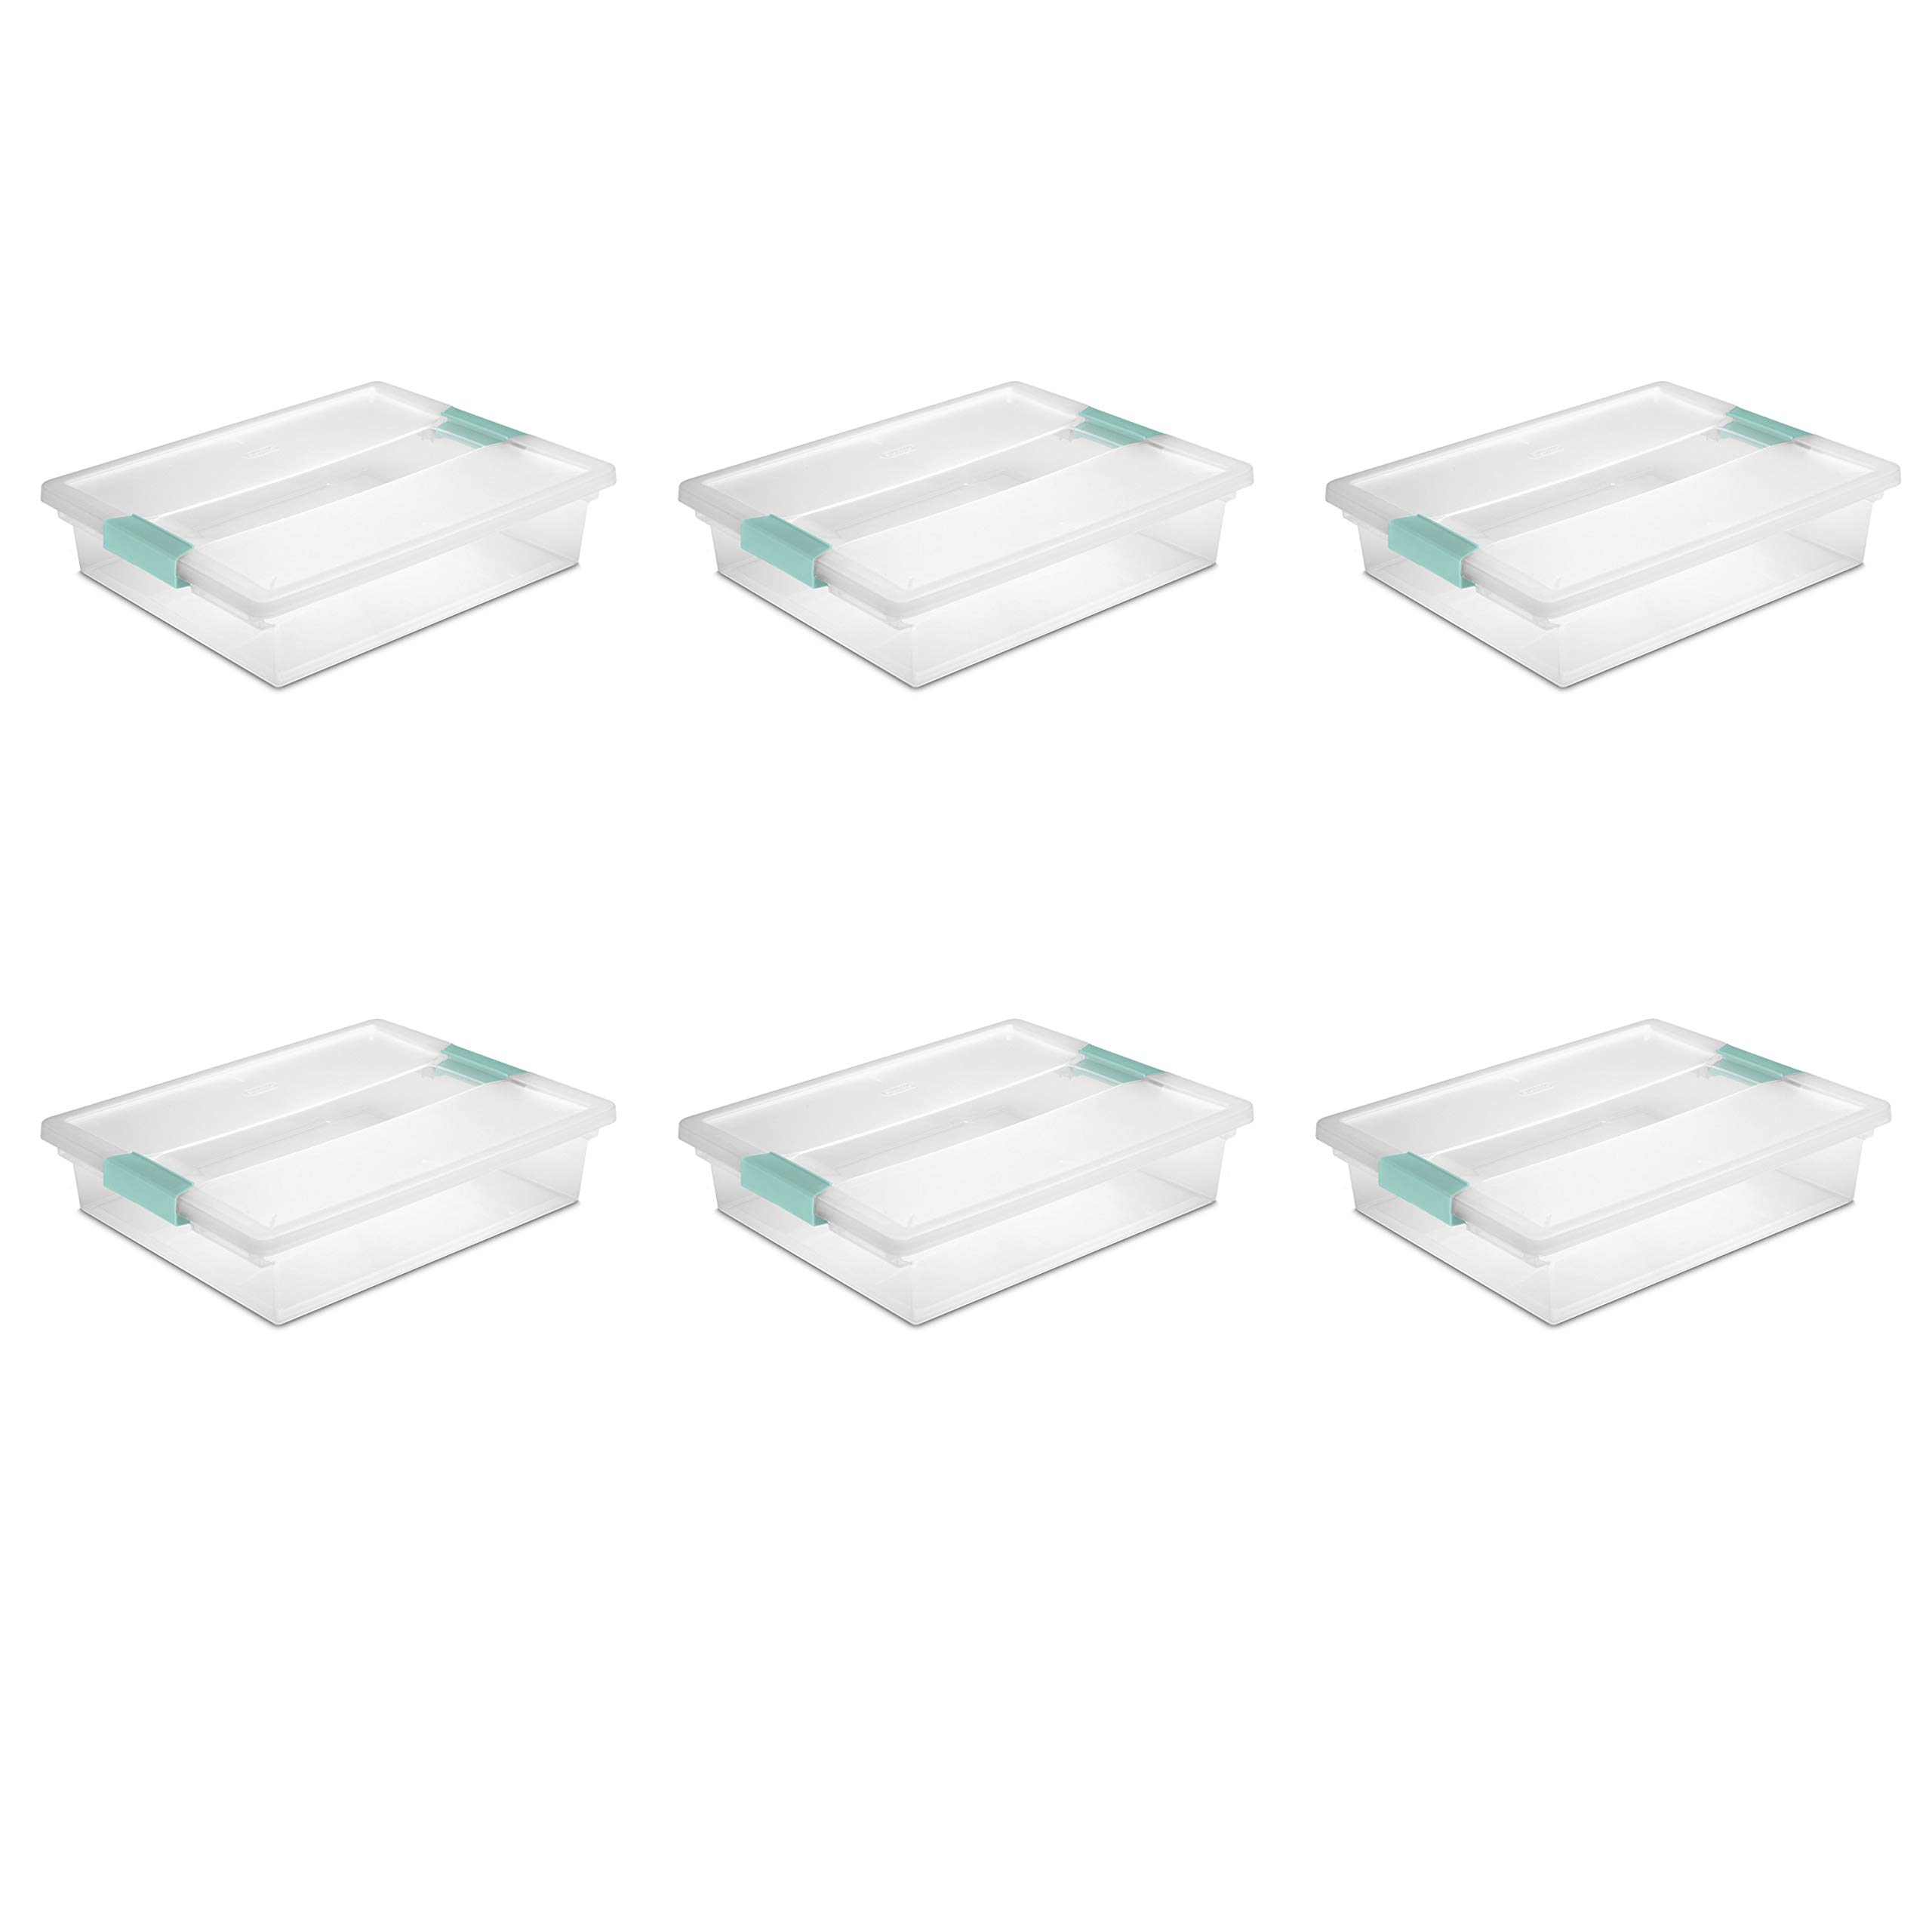 Sterilite Large 5.7 Qt Multi-Purpose File Clip Storage Box Organizing Tote Container with Latching Lid and Handles for Homes and Offices, (6 Pack)